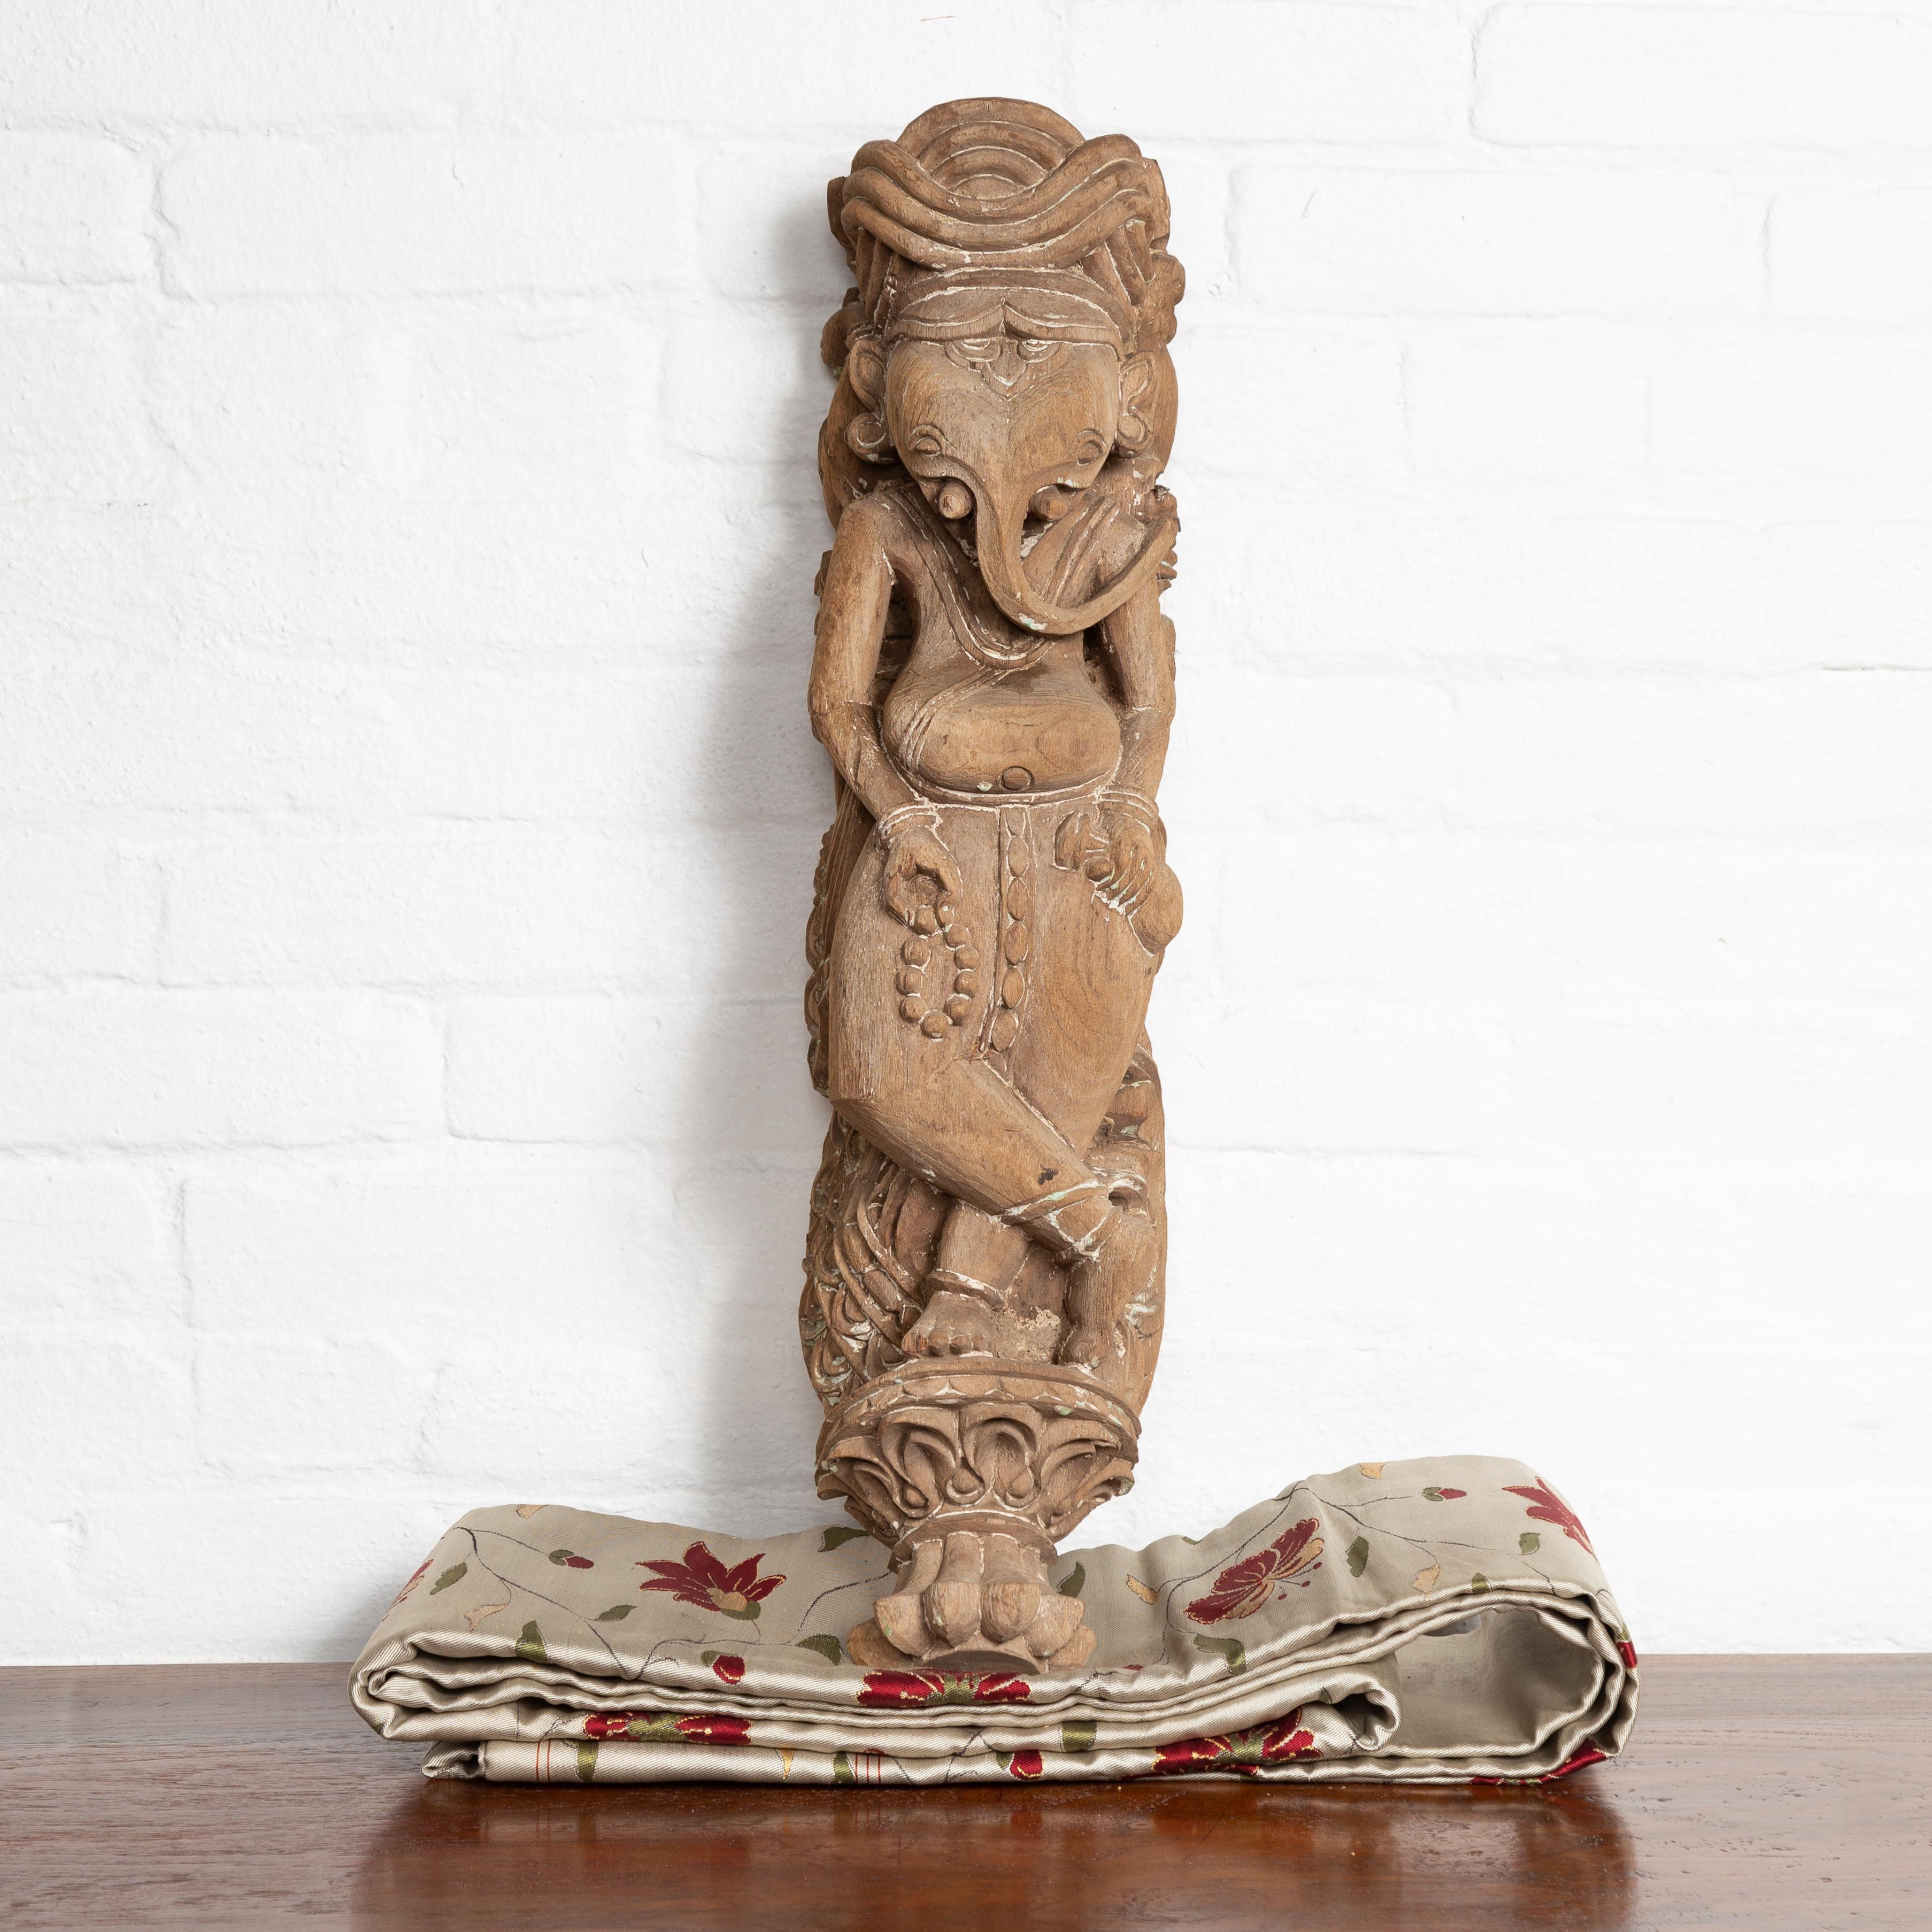 An early 20th century Indian architectural temple sculpture from Gujarat, depicting the Hindu deity Ganesha. Born in the Western portion of India in the state of Gujarat, this exquisite hand carved temple sculpture features the Hindu god Ganesha,